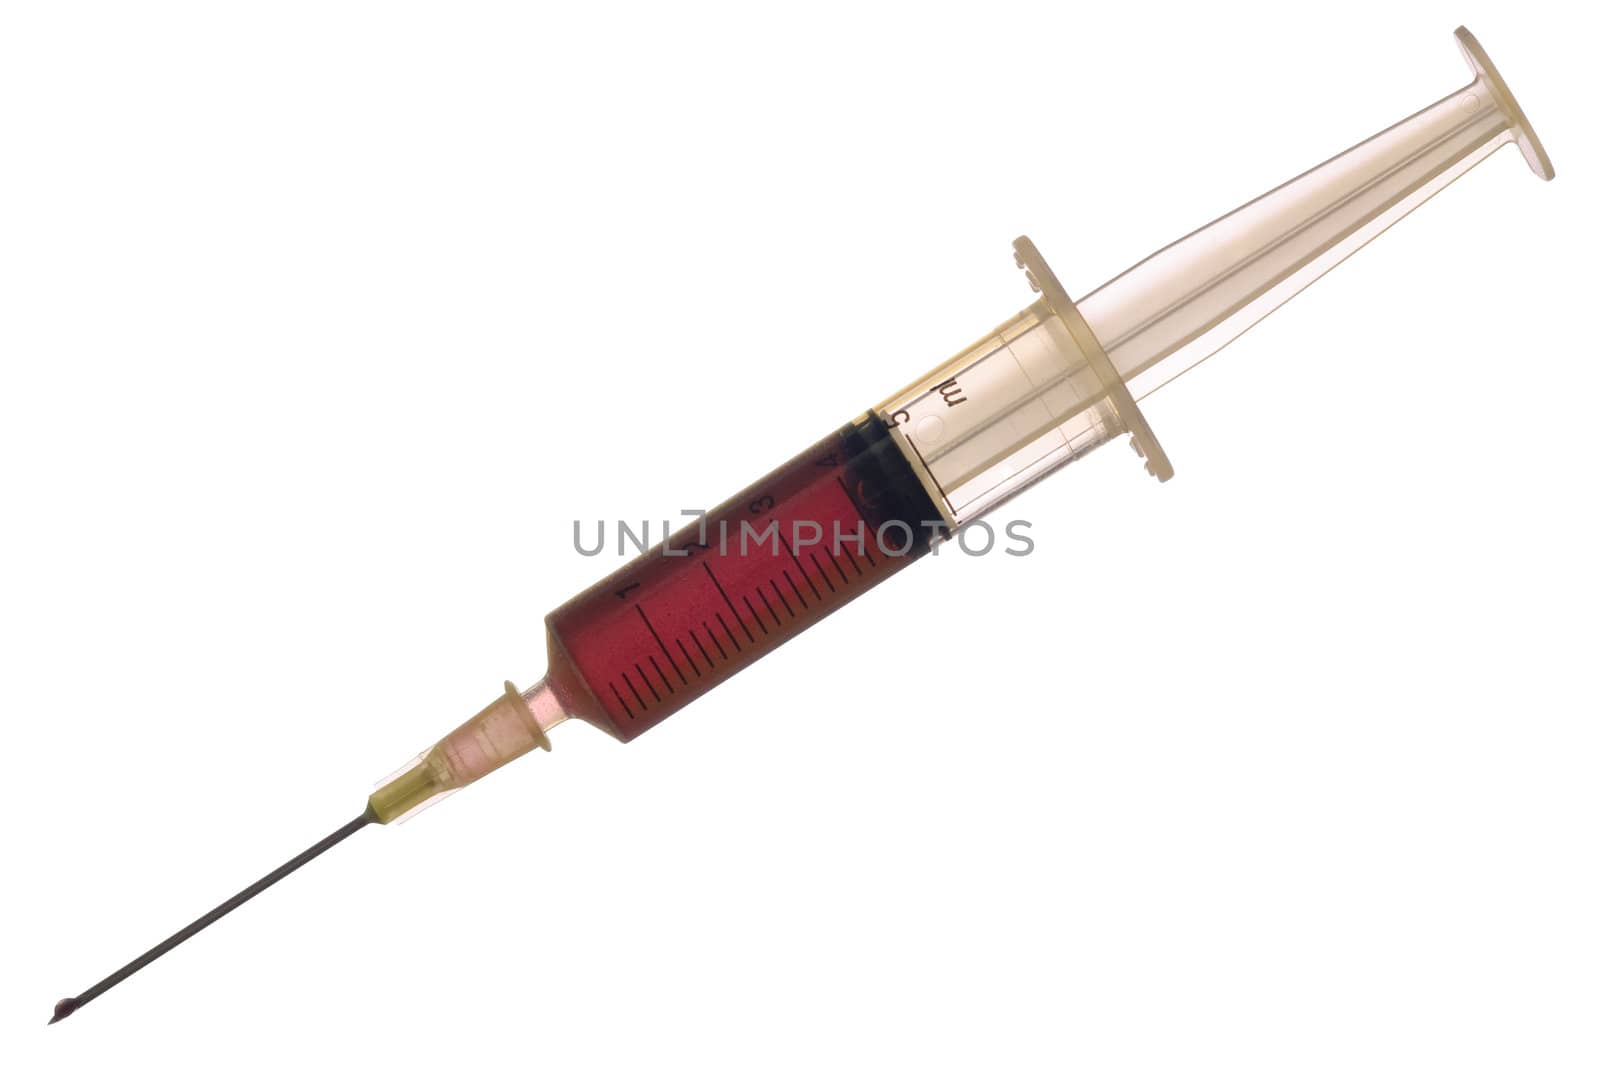  Medical syringe containing red liquid. Isolated on a white background